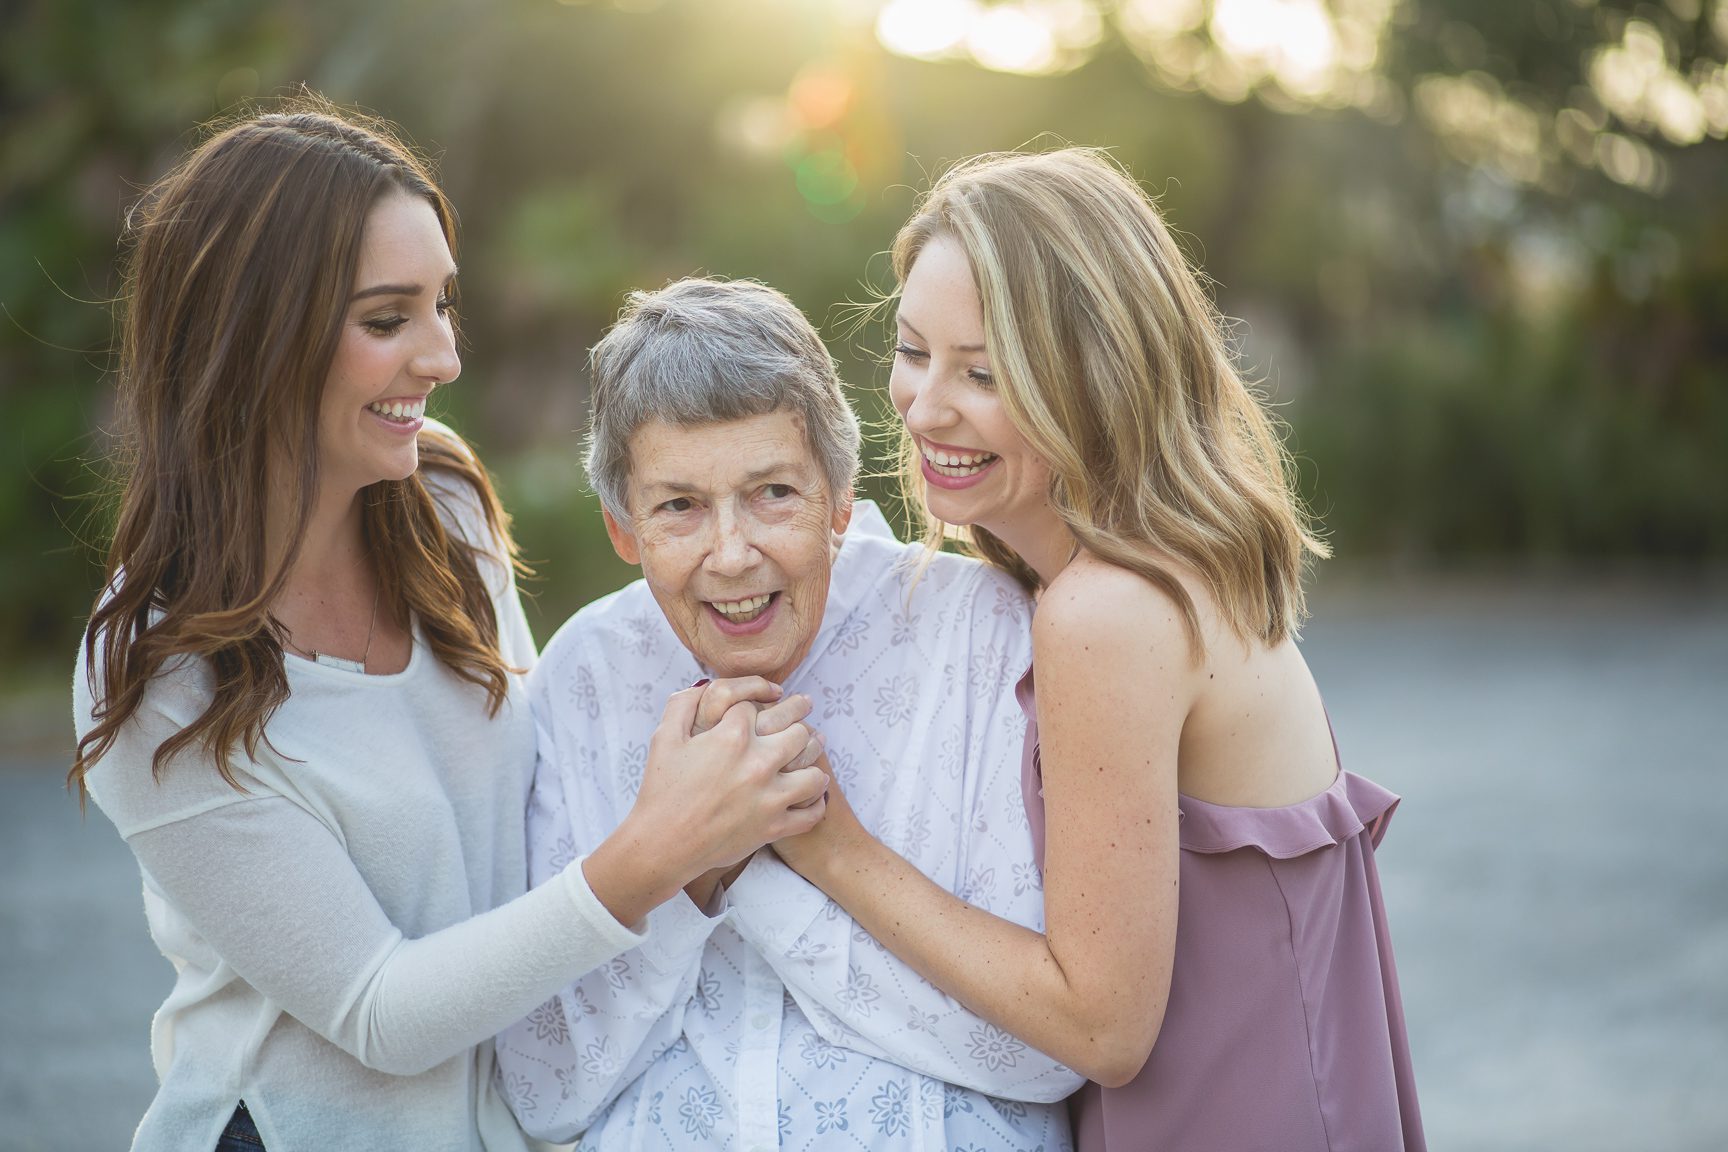 authentic family moment with two sisters and their grandmother at golden hour in St. Petersburg, FL